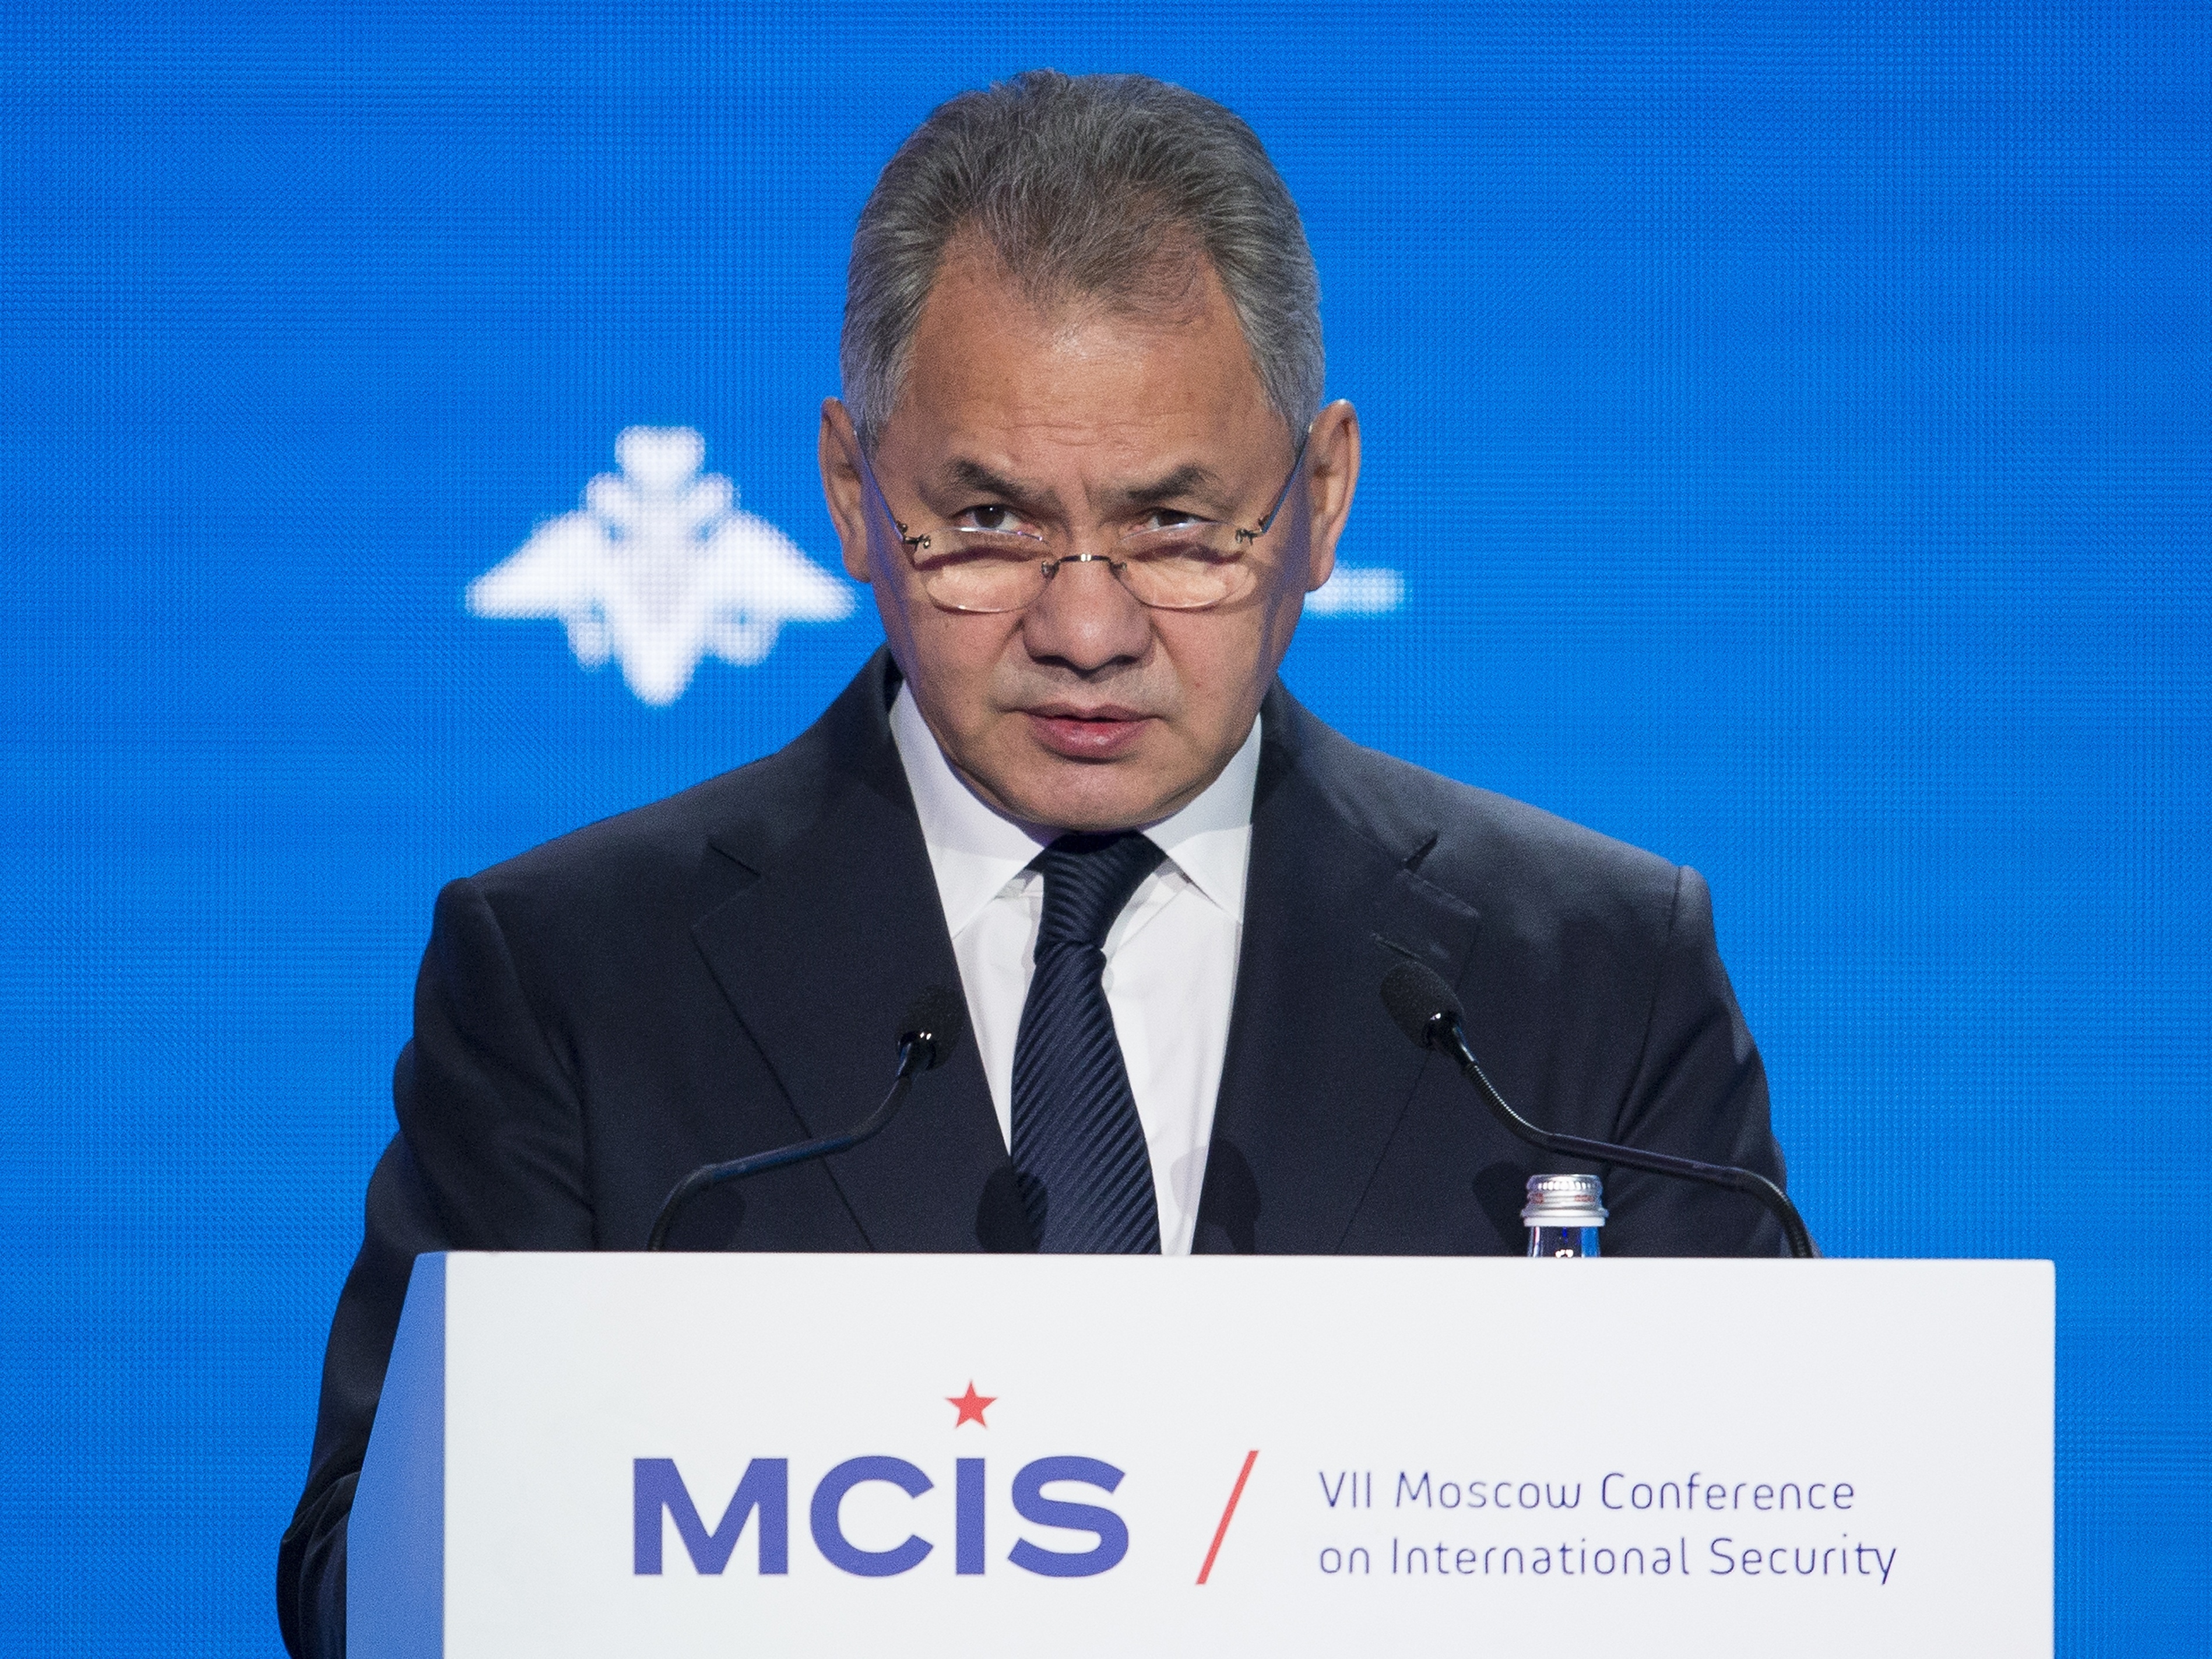 Russian Defense Minister Sergei Shoigu speaks during the Conference on International Security in Moscow, Russia, Wednesday, April 4, 2018. Photo: AP